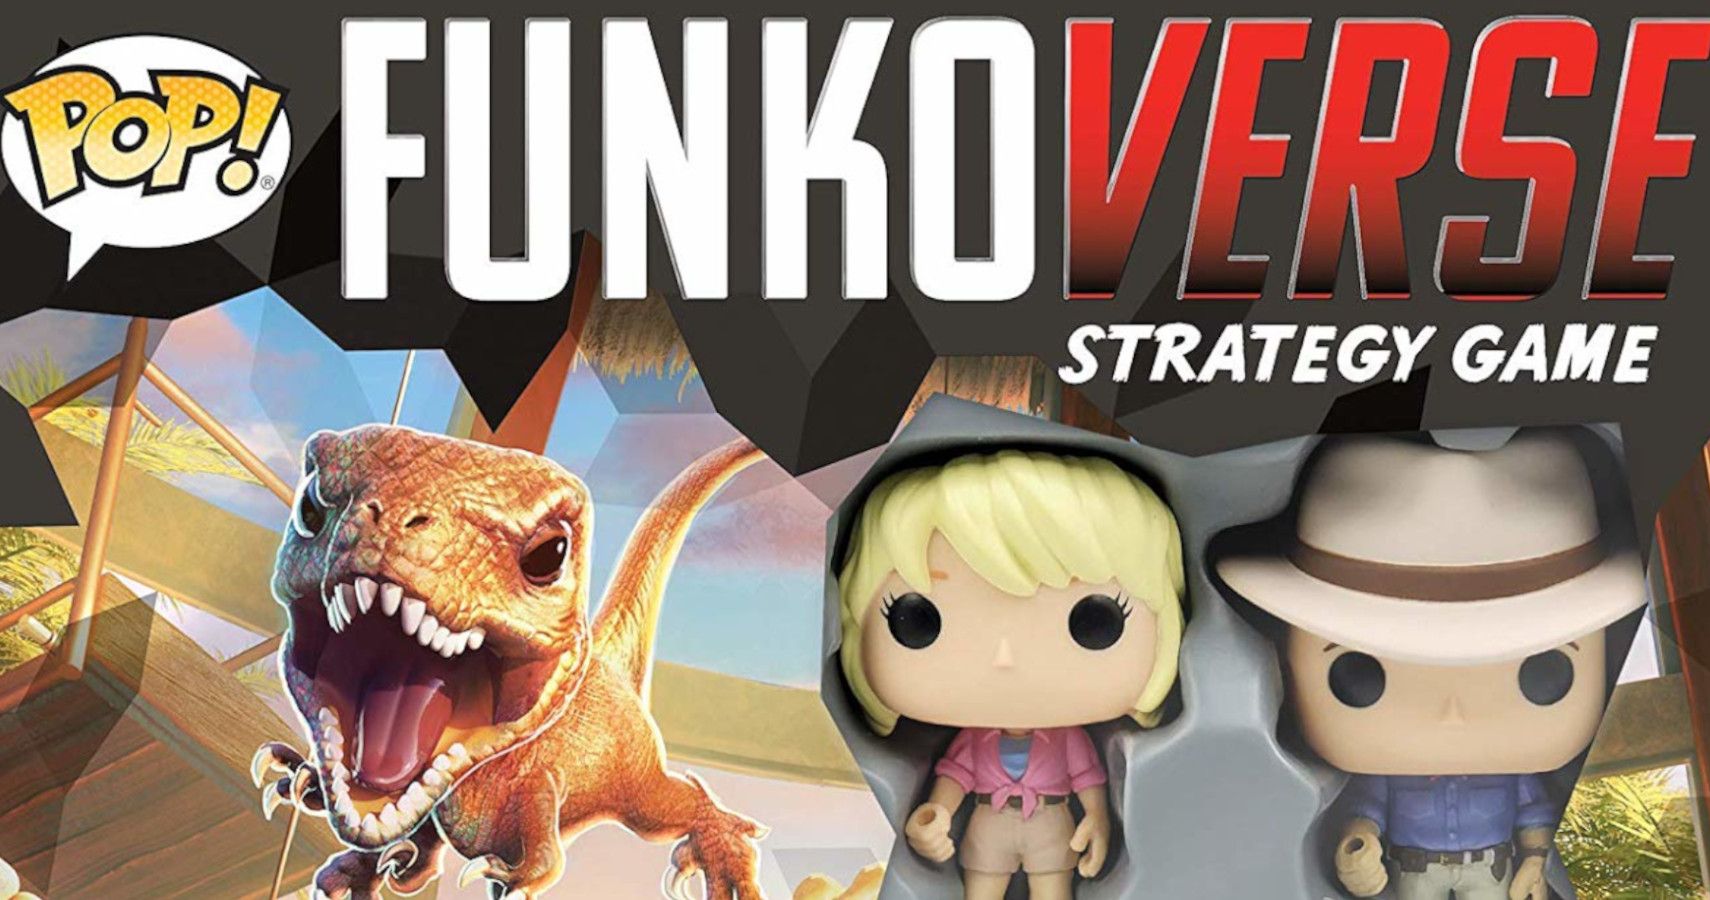 Funkoverse Review The Funko Pop Board Game Is As Fun As It Looks